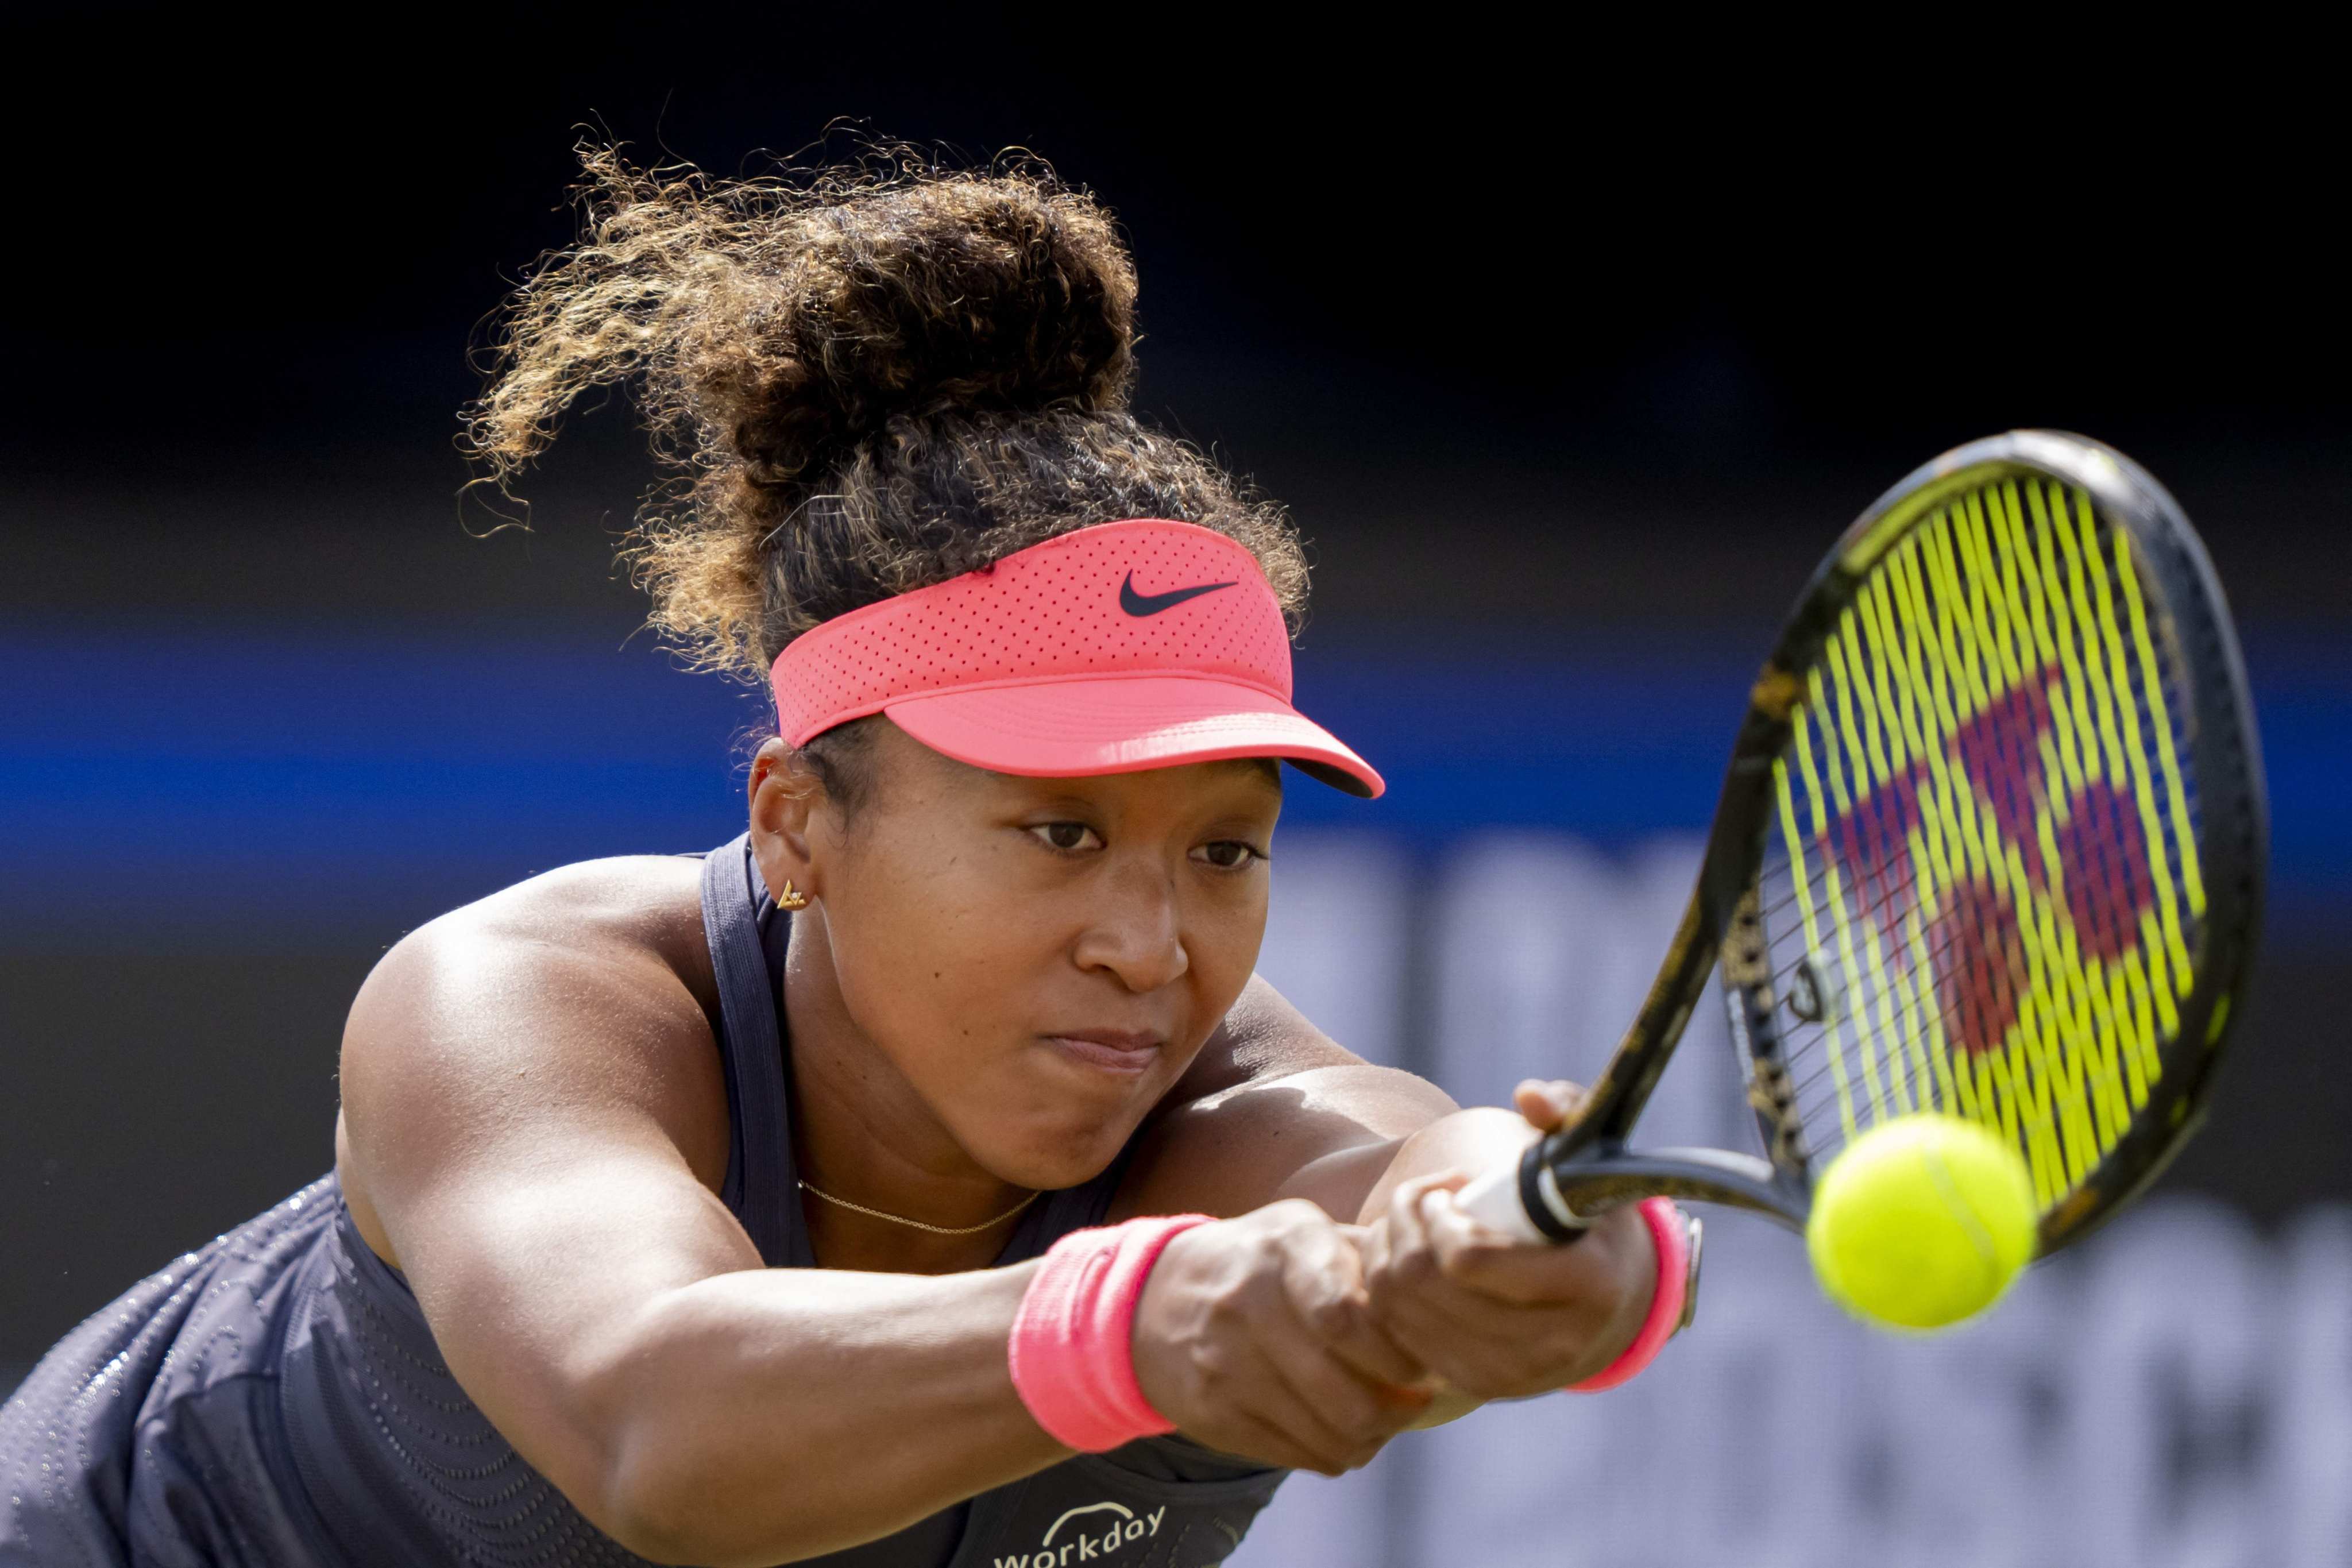 The International Tennis Federation cleared Osaka to compete in Paris by awarding her a special ranking for players who have been away from the tour. Photo: AFP